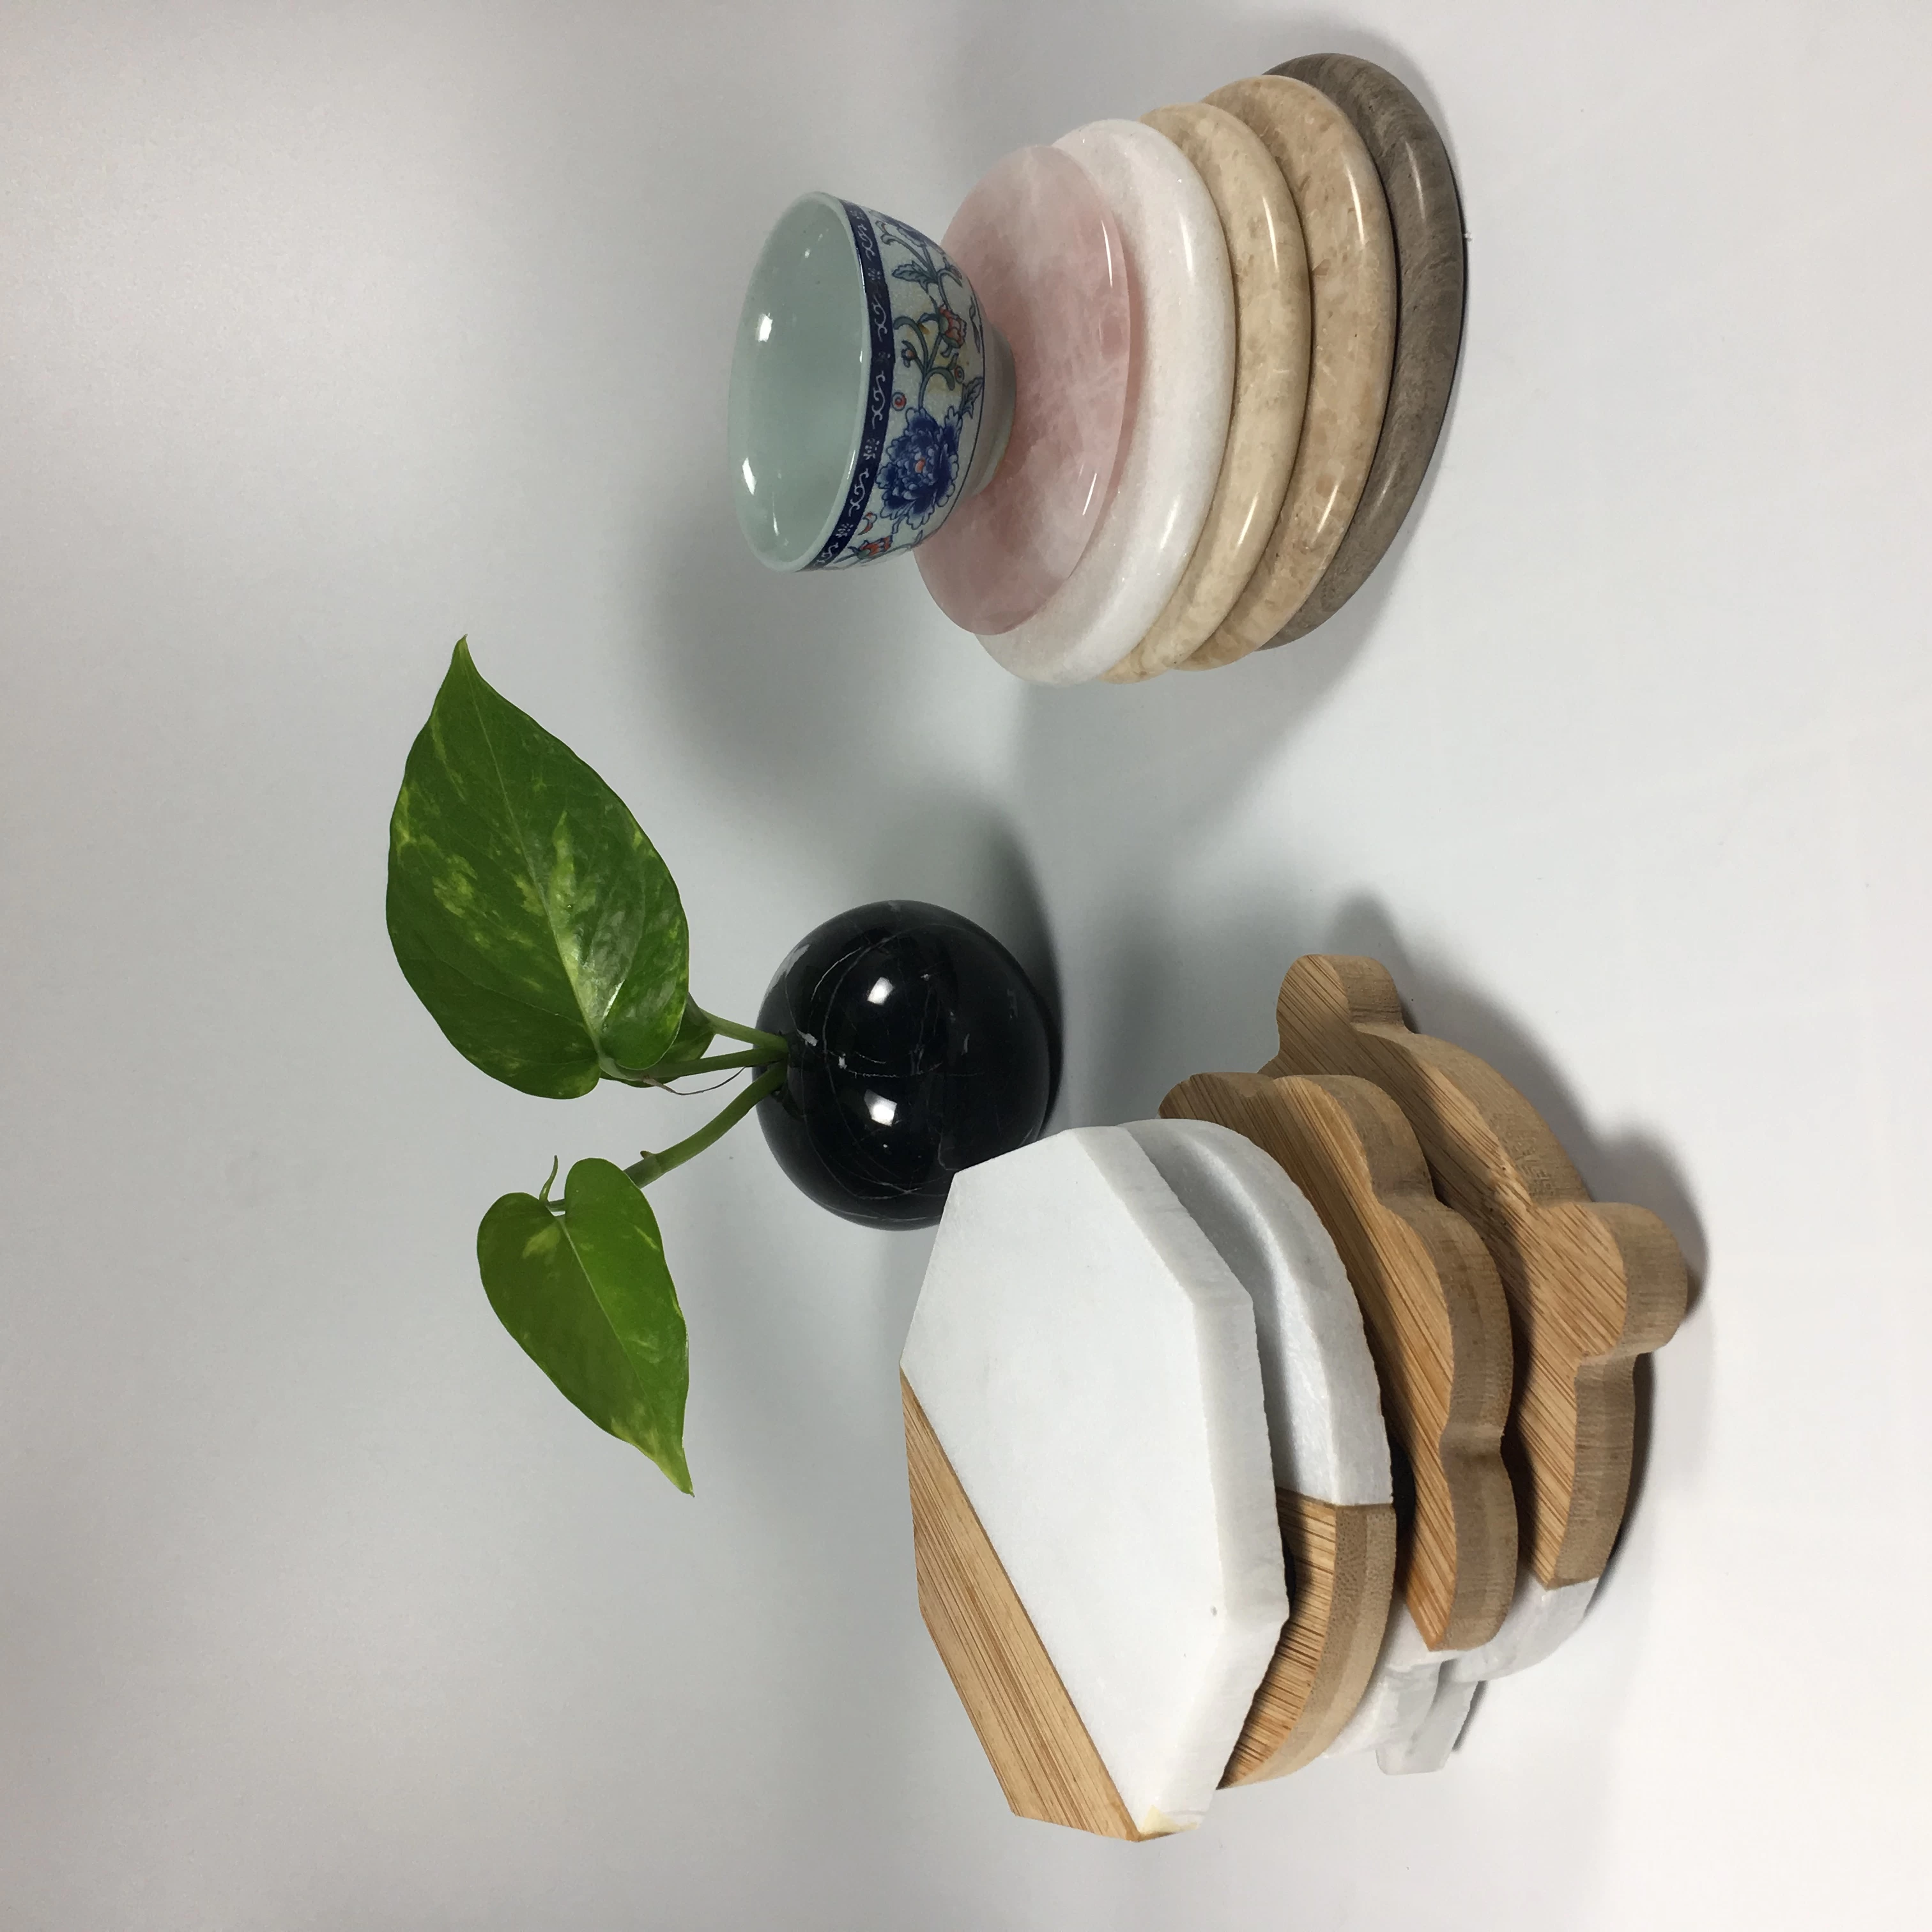 Marble and wood coasters for drink